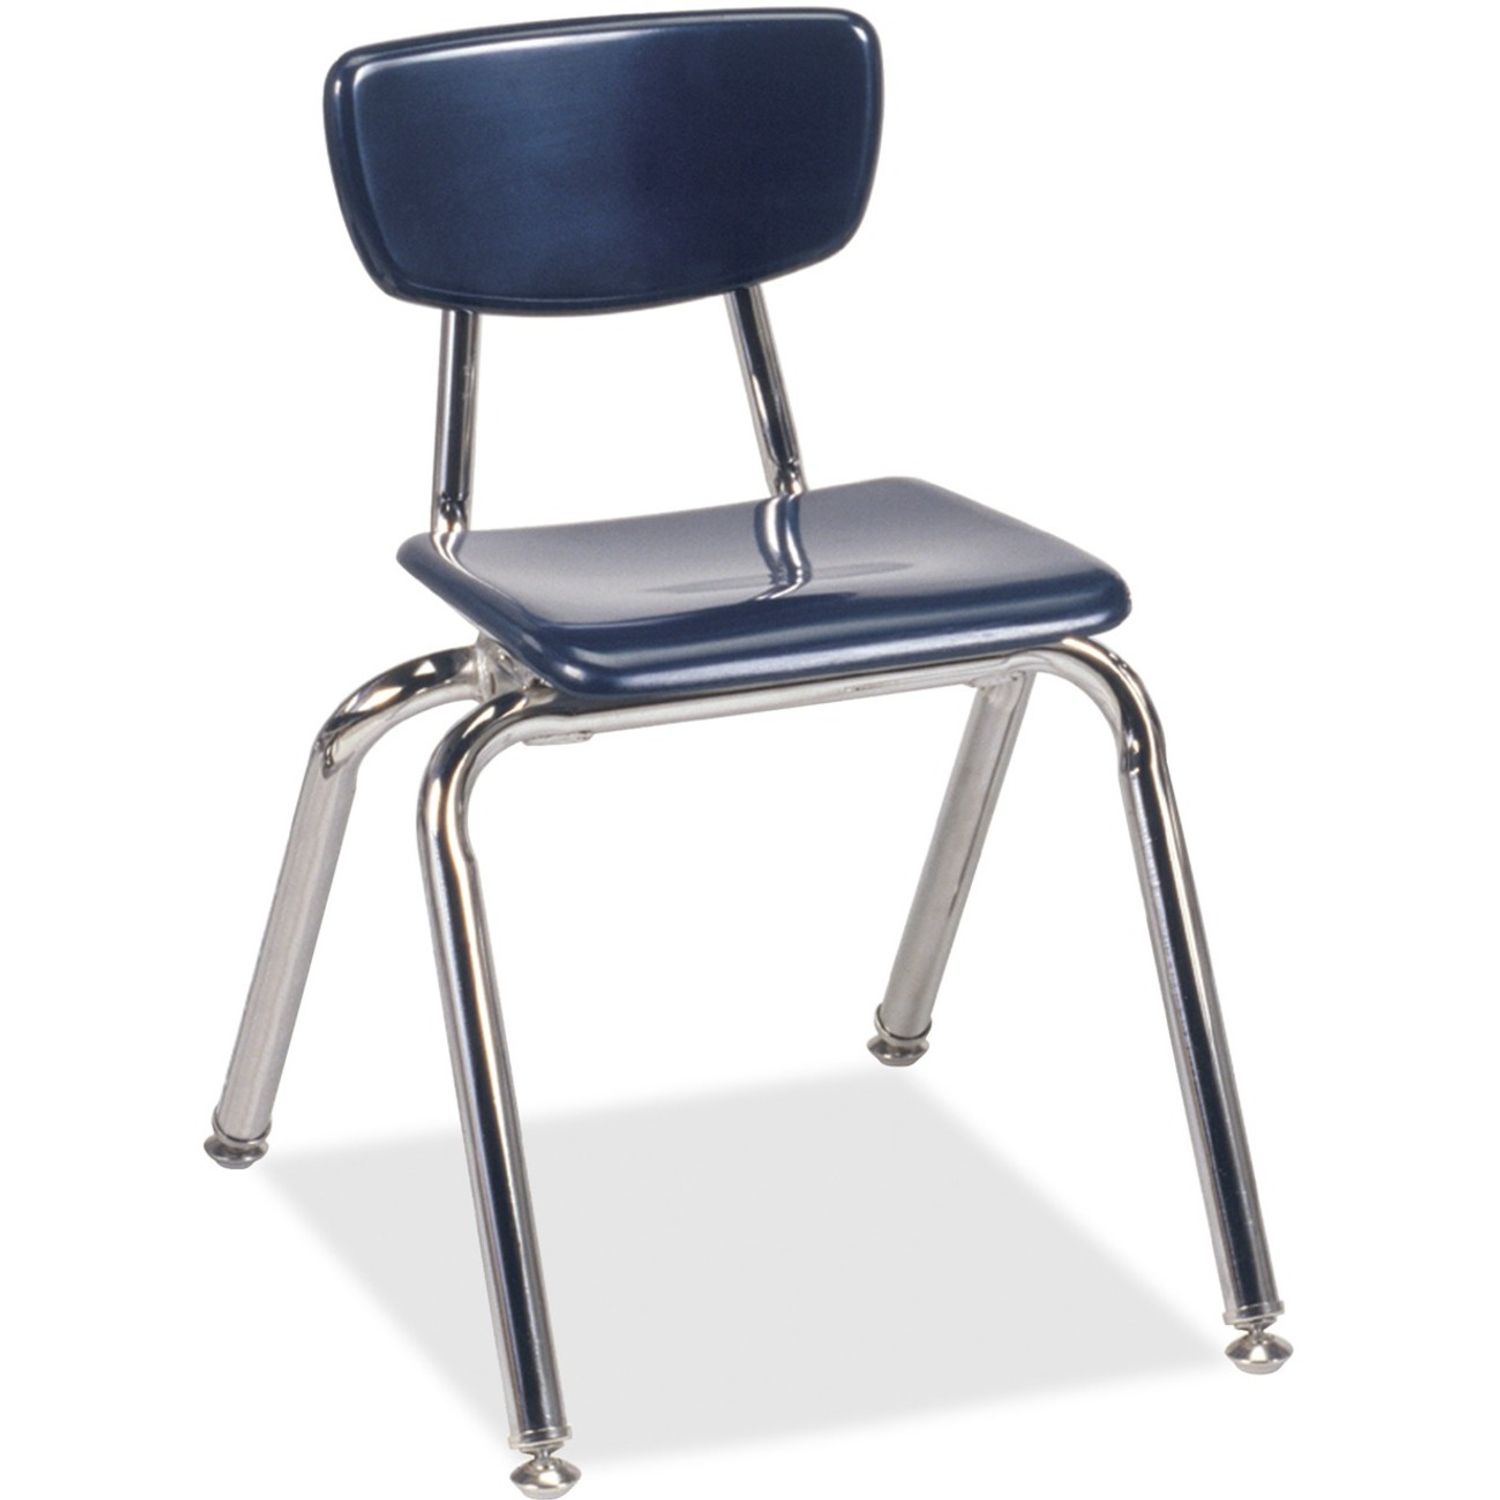 3014 Stack Chair Chrome Frame16.5" x 17.25" x 26", Plastic Navy Seat